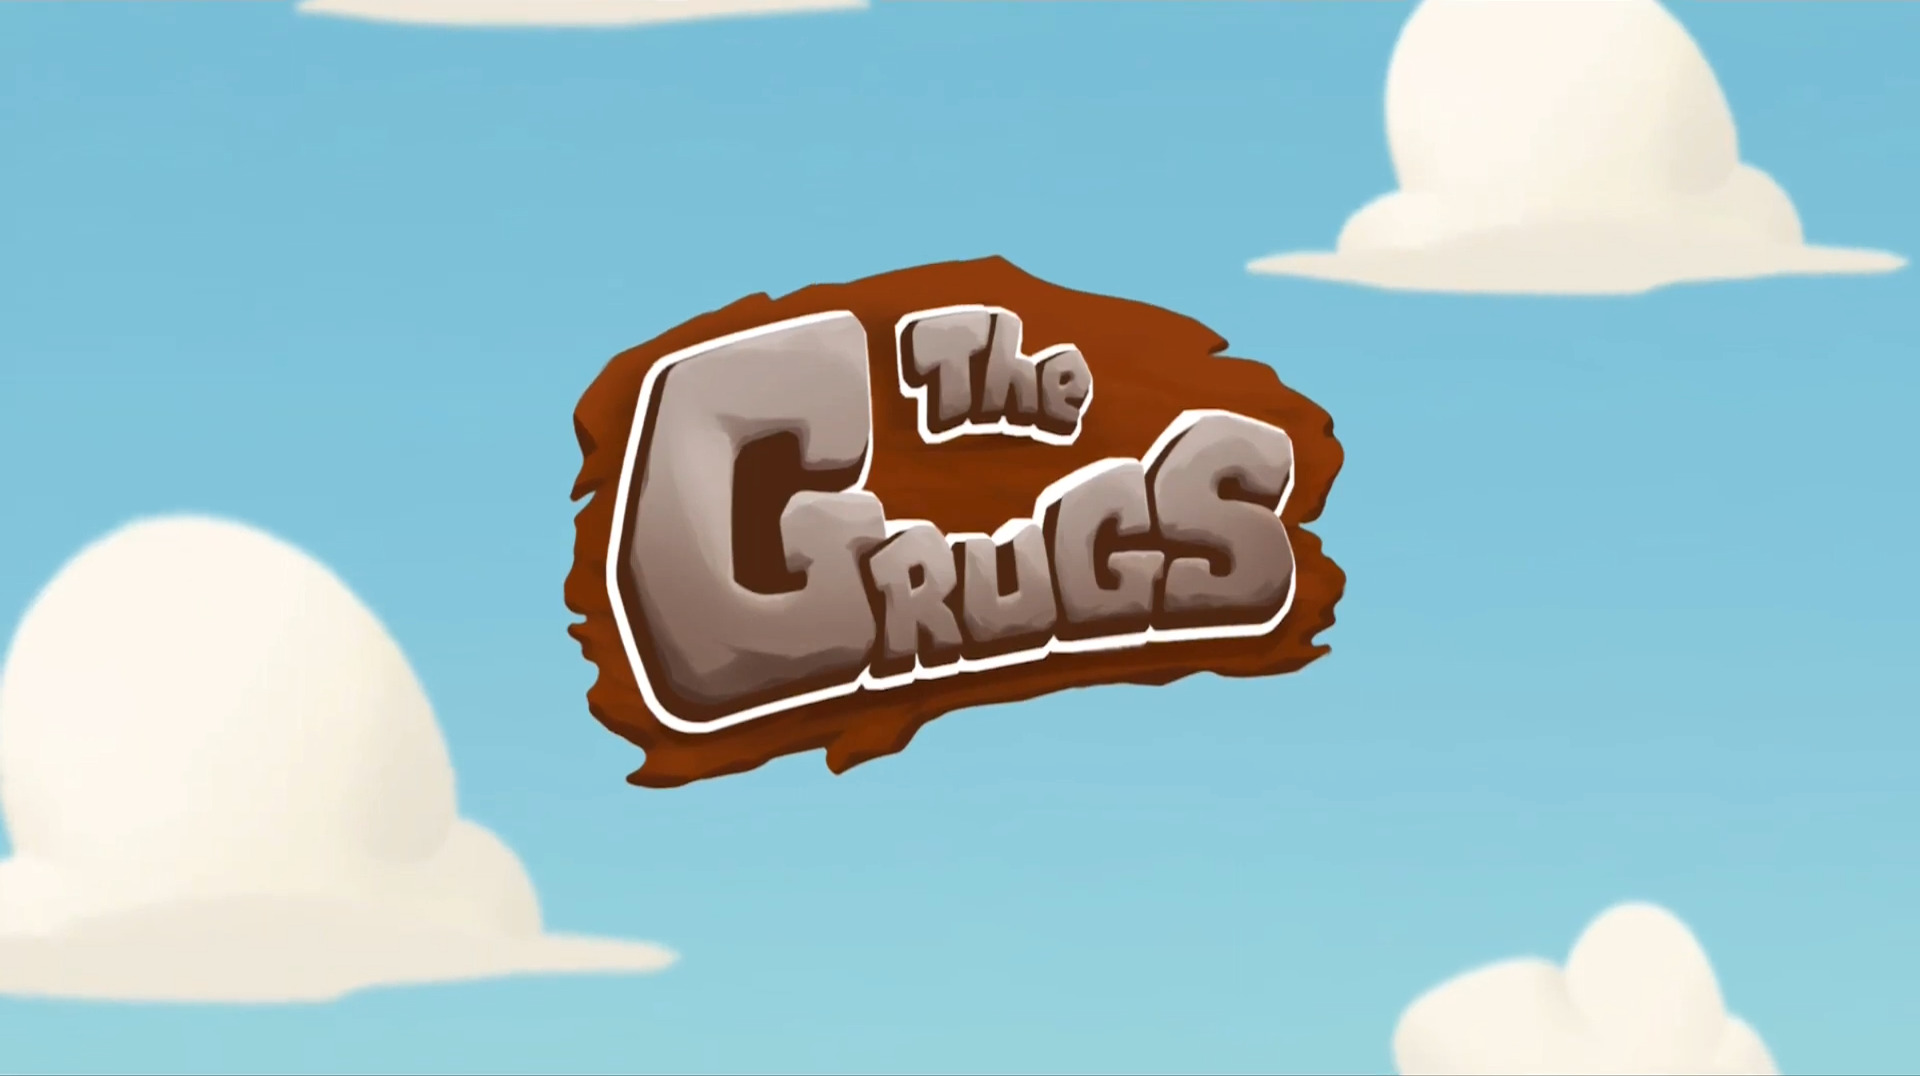 Scarica The Grugs: Hector's rest quest gratis per Android A.n.d.r.o.i.d. .5...0. .a.n.d. .m.o.r.e.